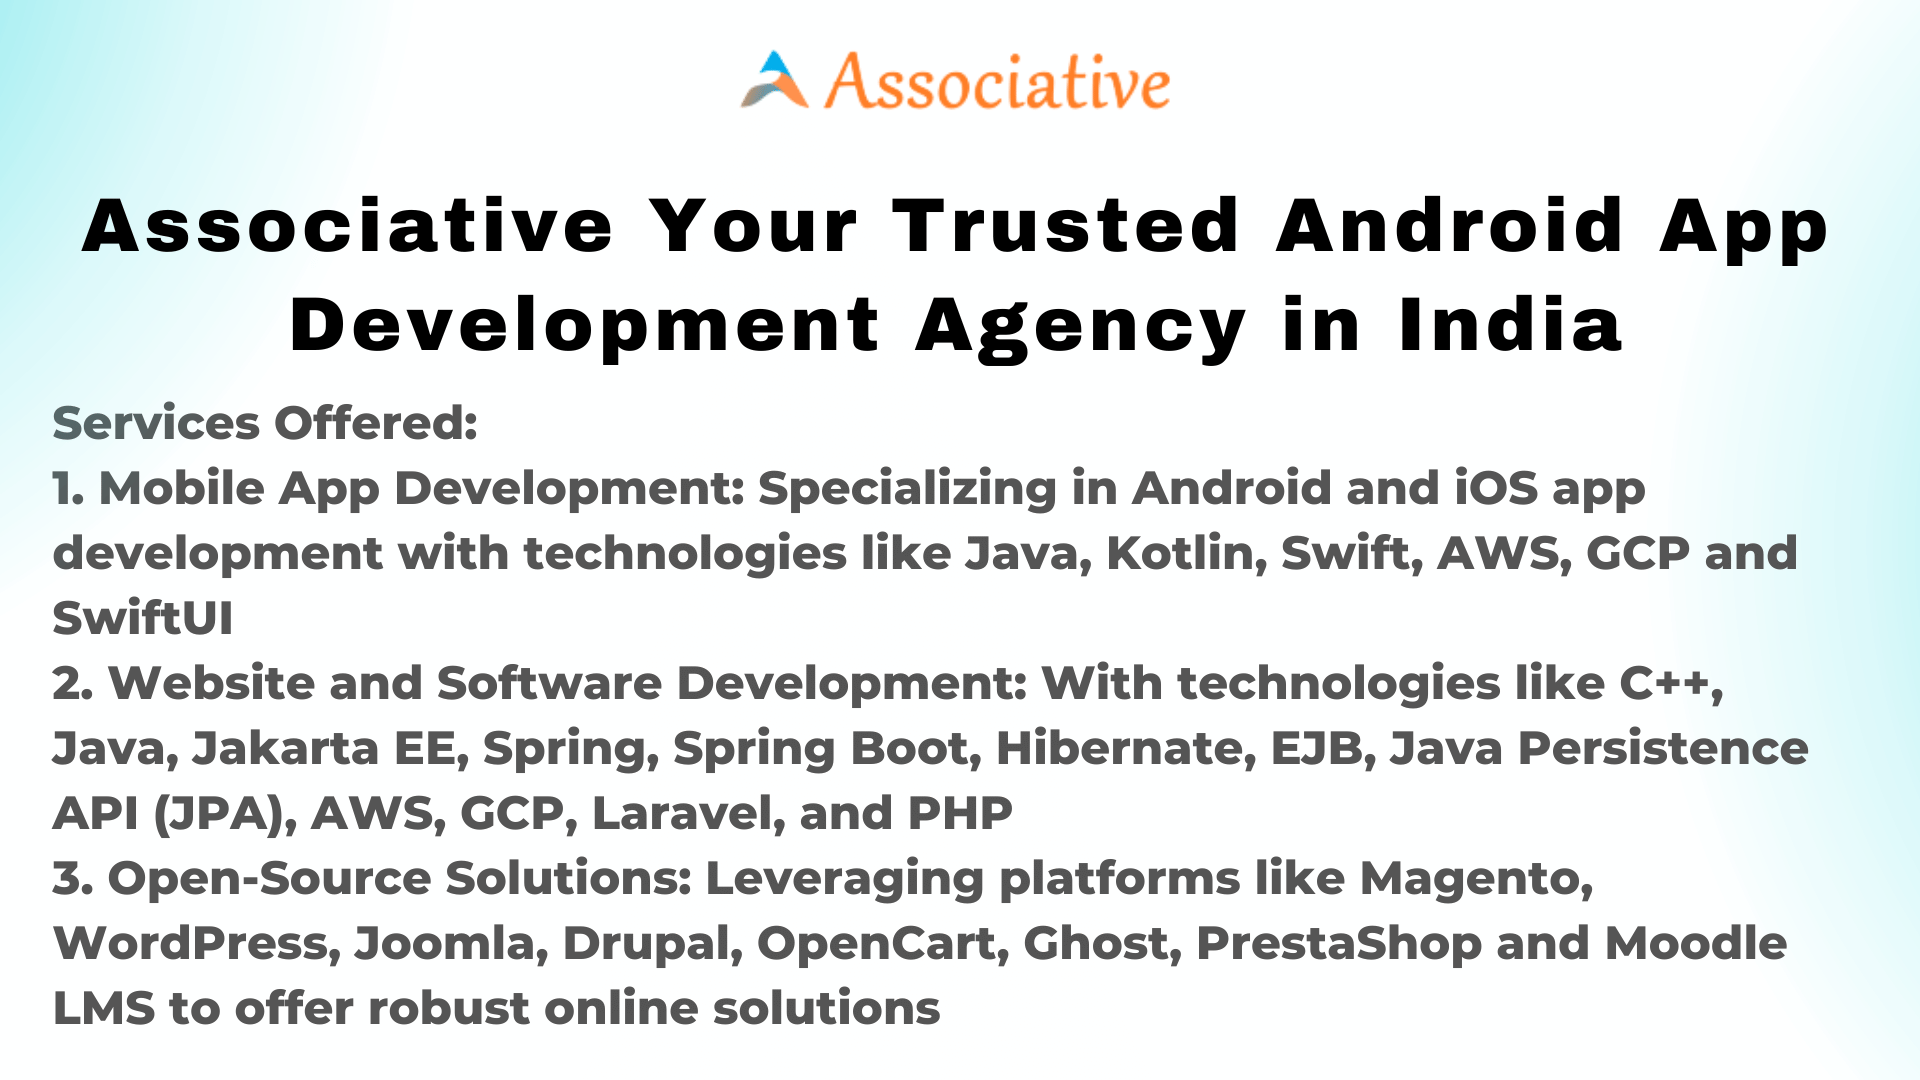 Associative Your Trusted Android App Development Agency in India